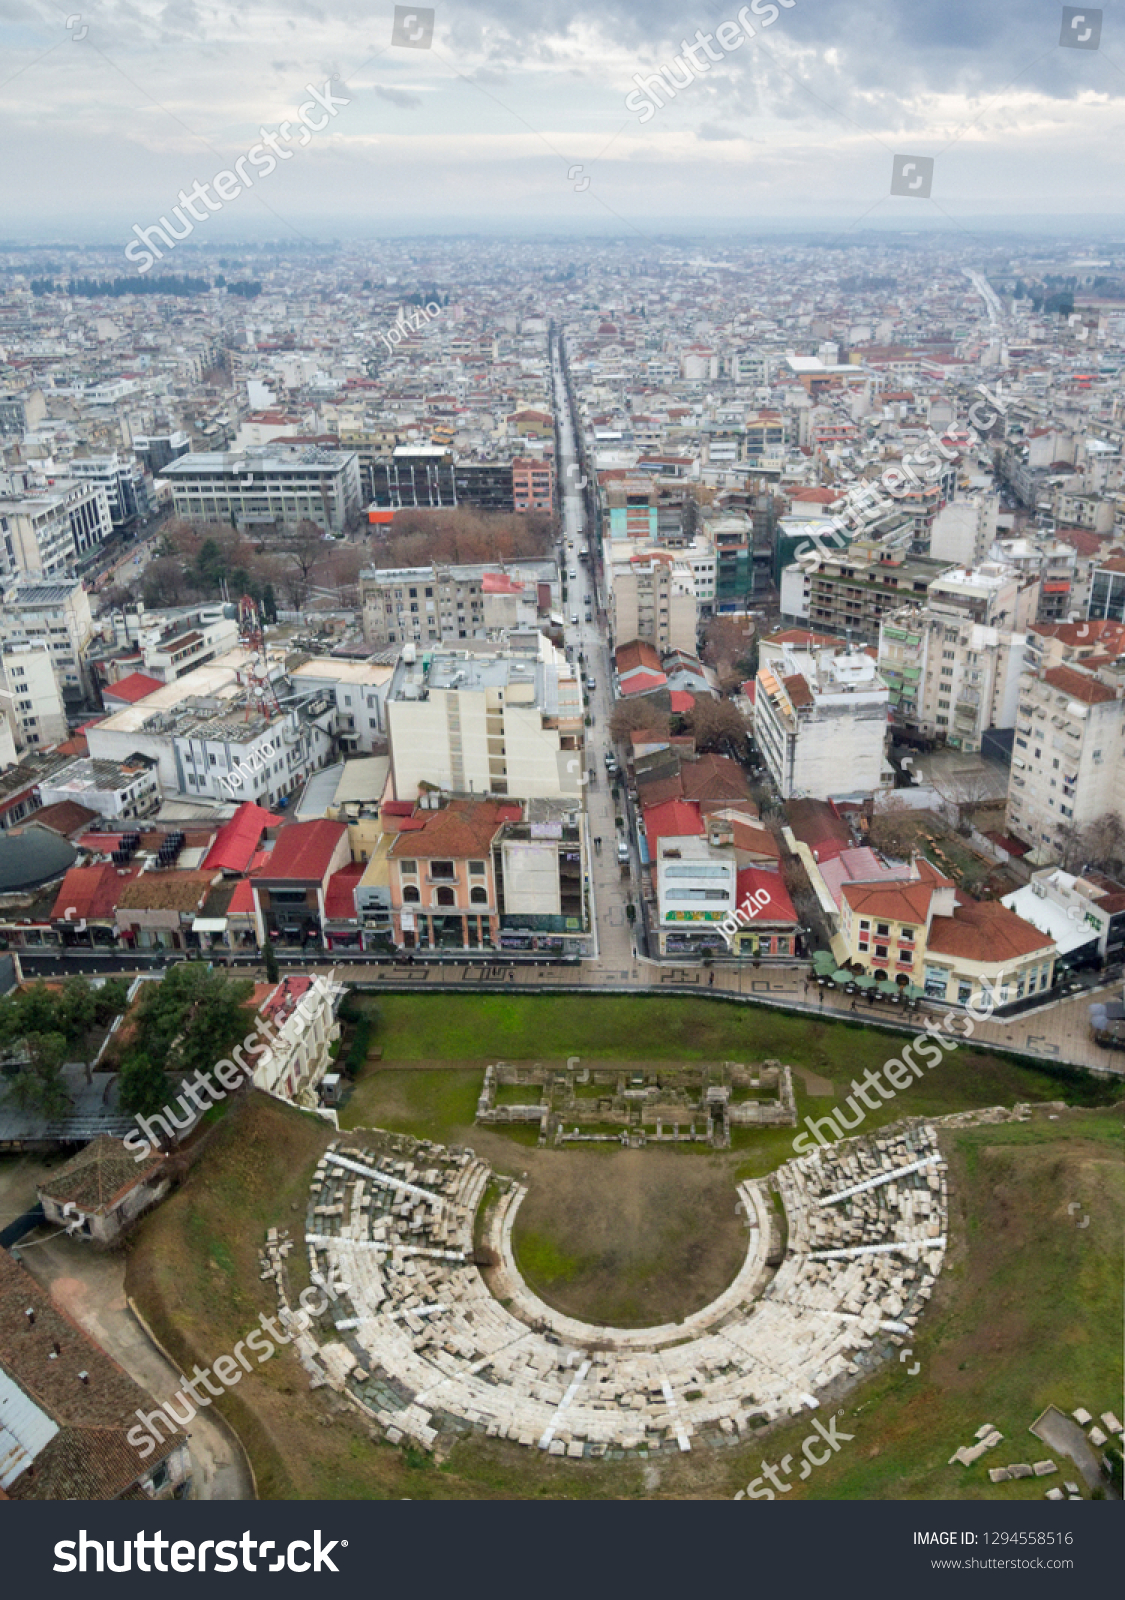 Aerial photo of the ancient theater of Larissa, and part of the city. #1294558516